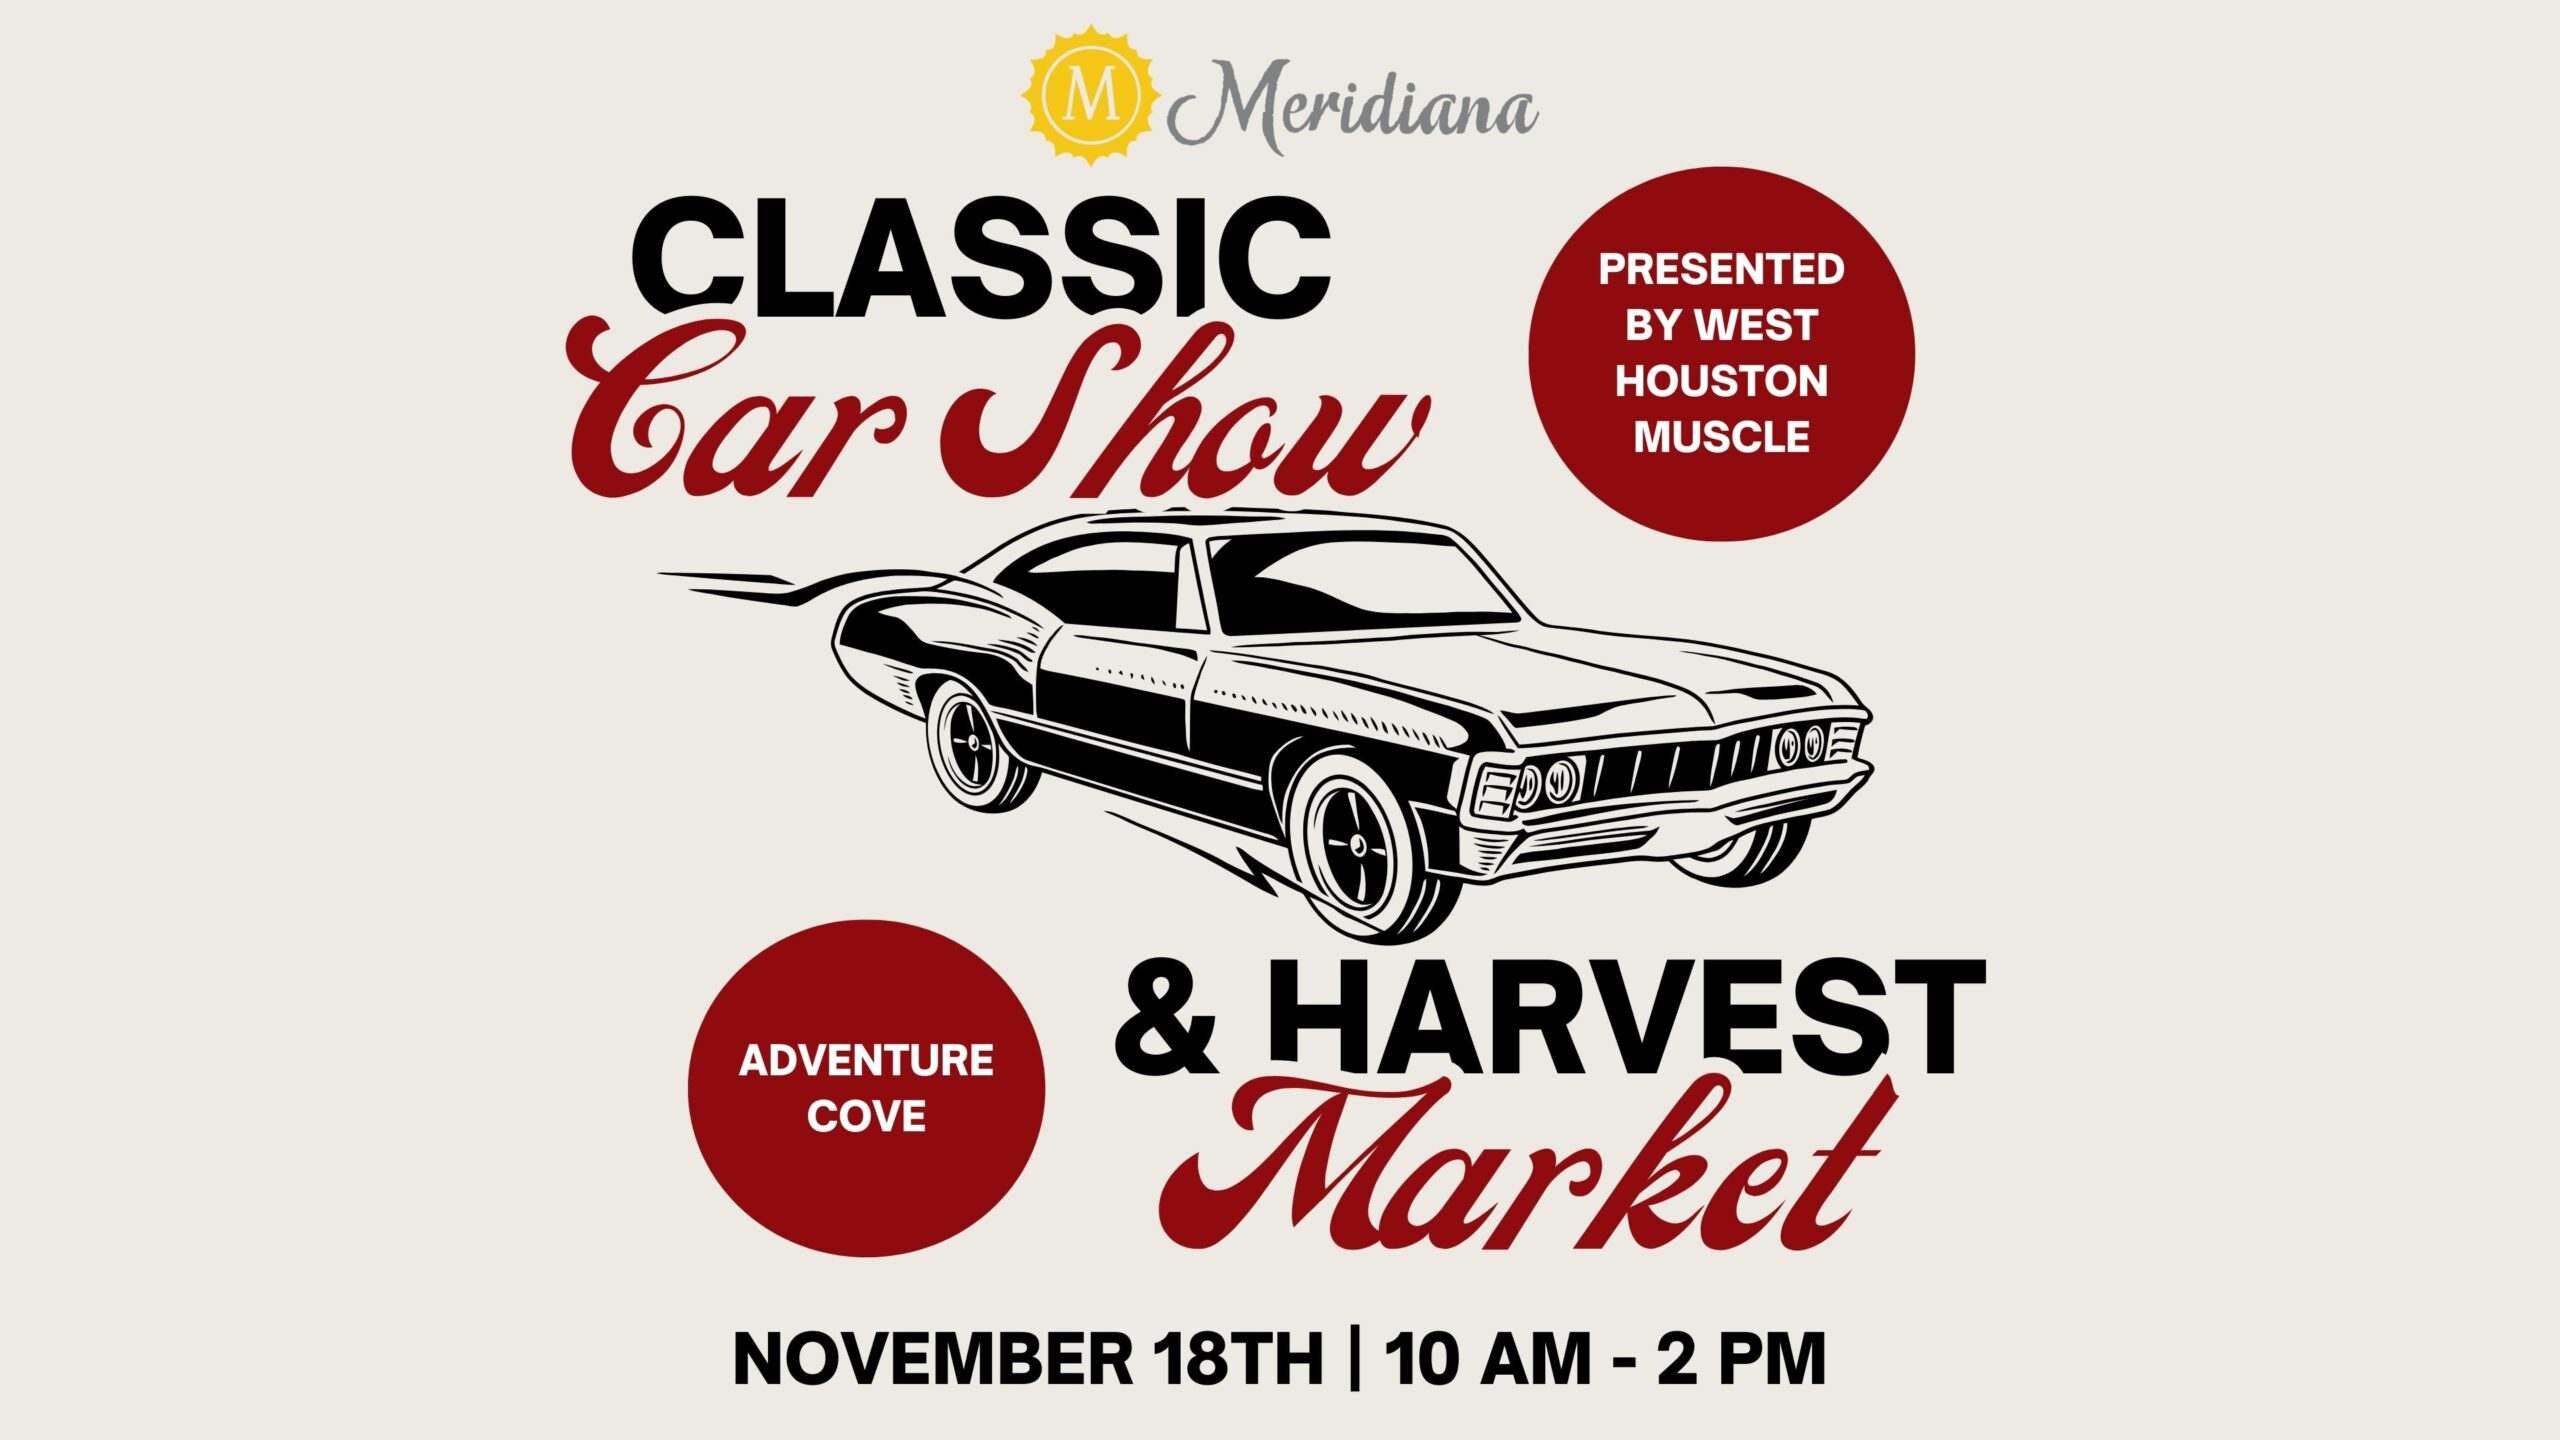 Meridiana Hosts Debut of Classic Car Show and Harvest Market